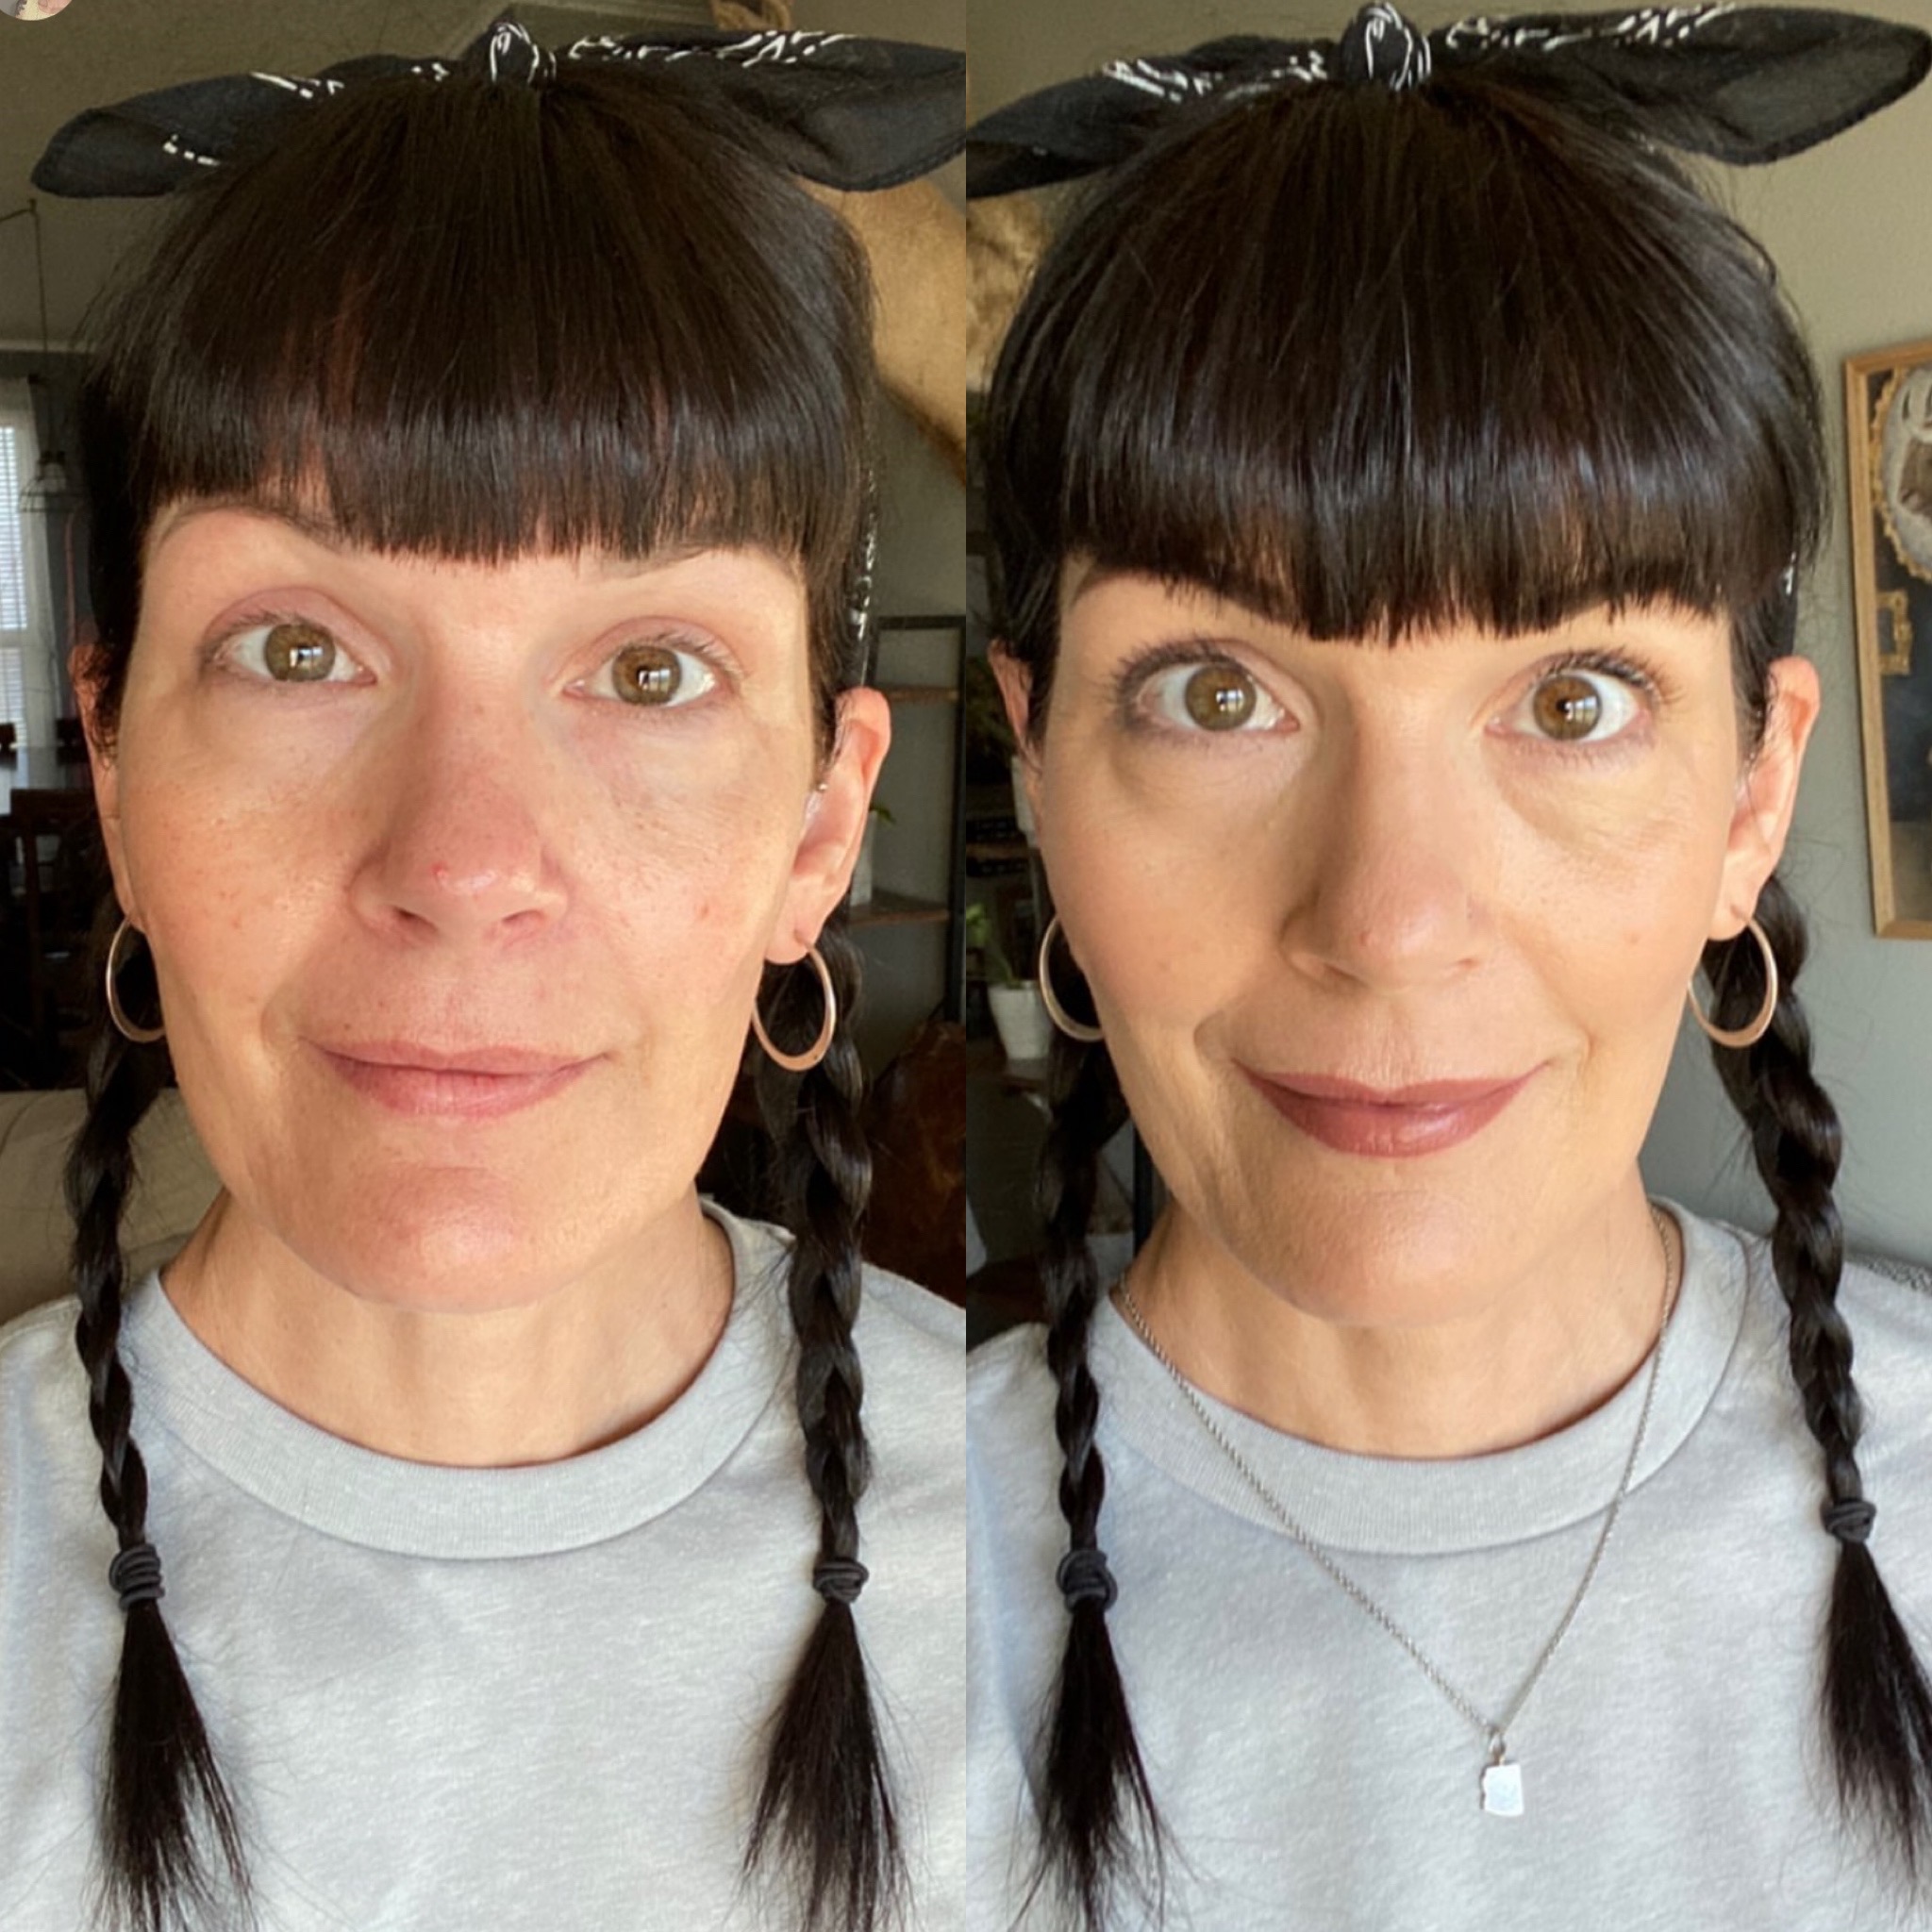 SEINT cream makeup before and after, makeup transformation